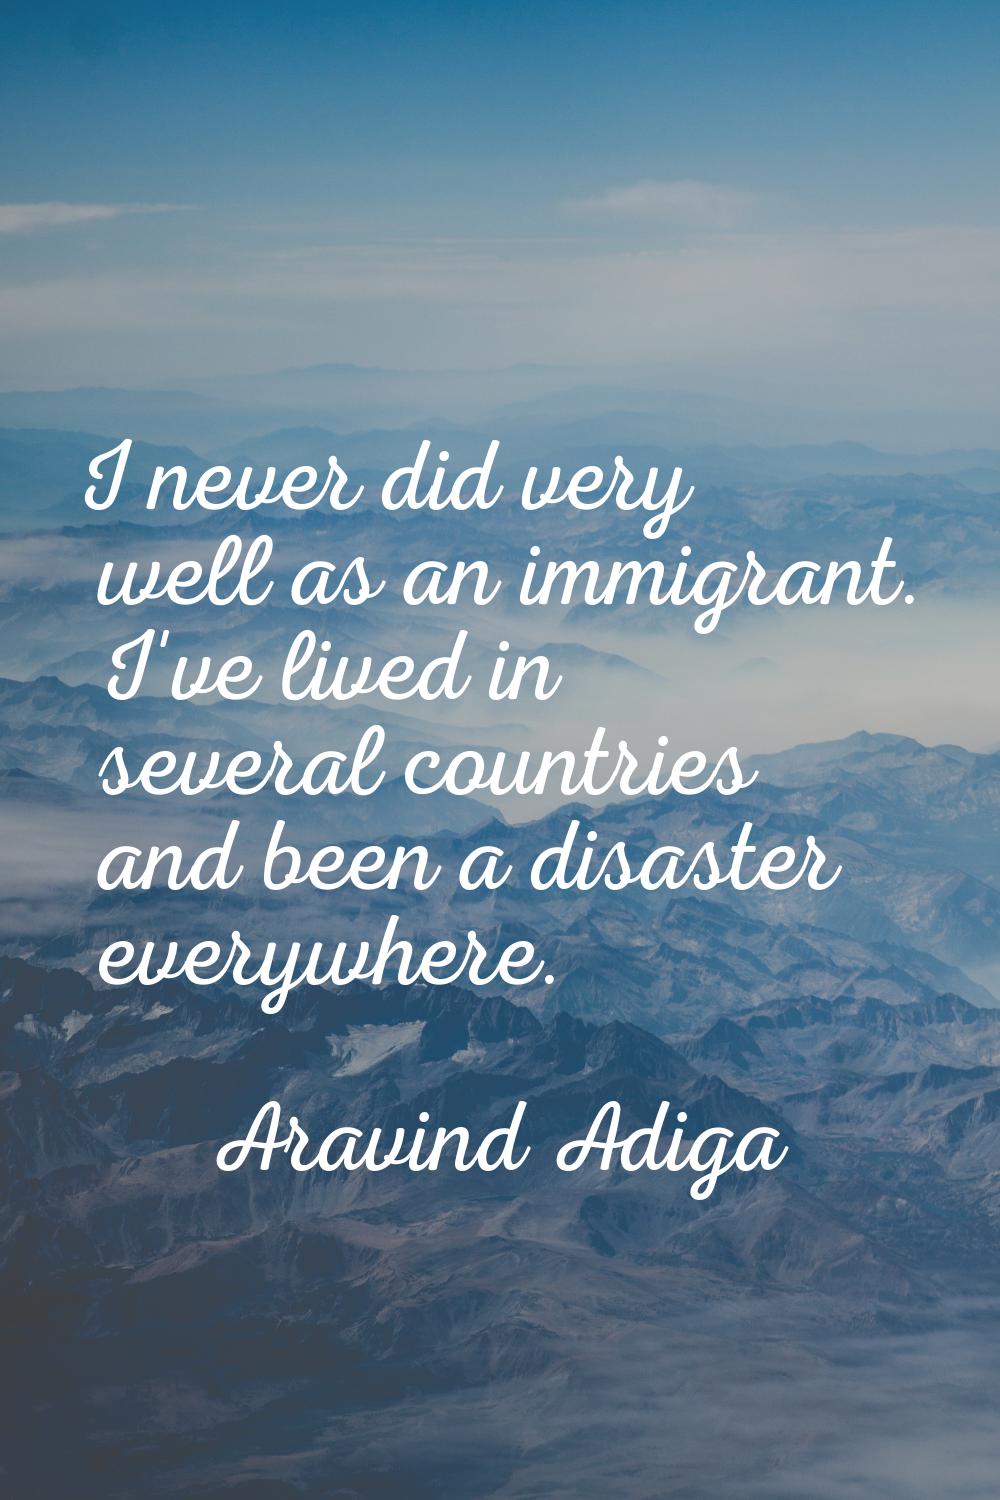 I never did very well as an immigrant. I've lived in several countries and been a disaster everywhe